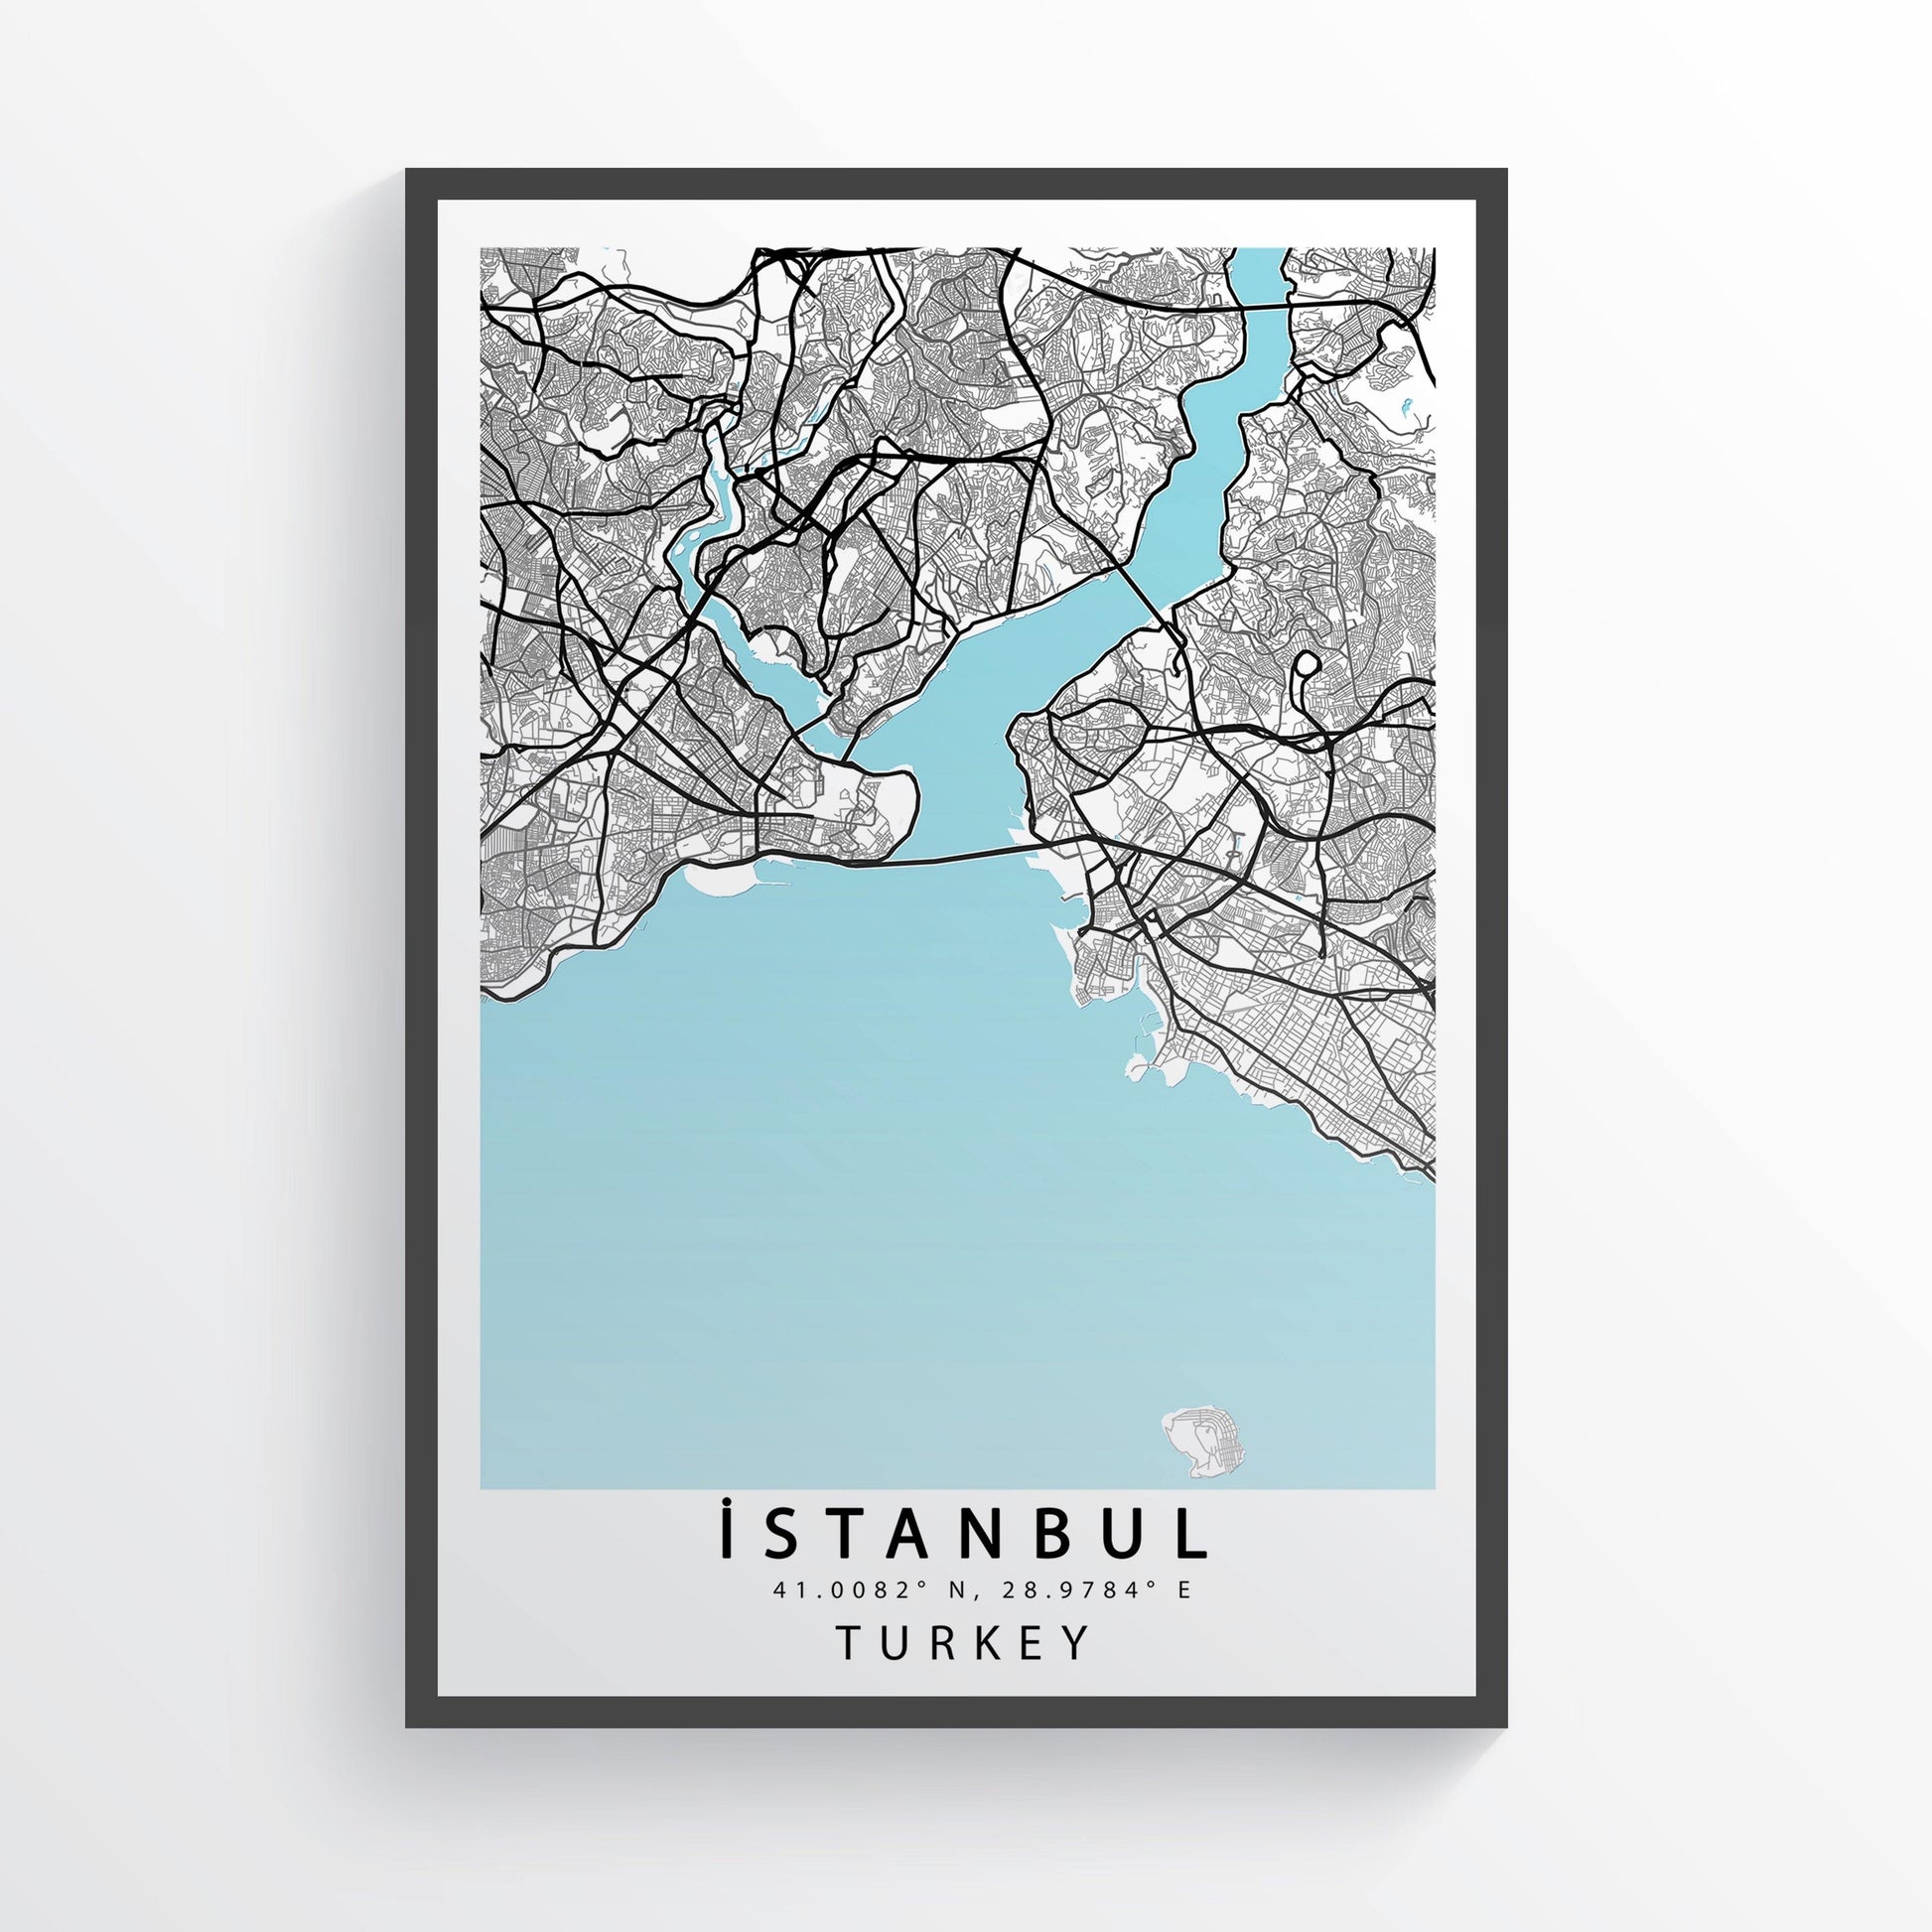 Istanbul Map Print | Turkey Street Map Road | Istanbul Poster Art | Istanbul Wall Art | Variety Sizes - 98types